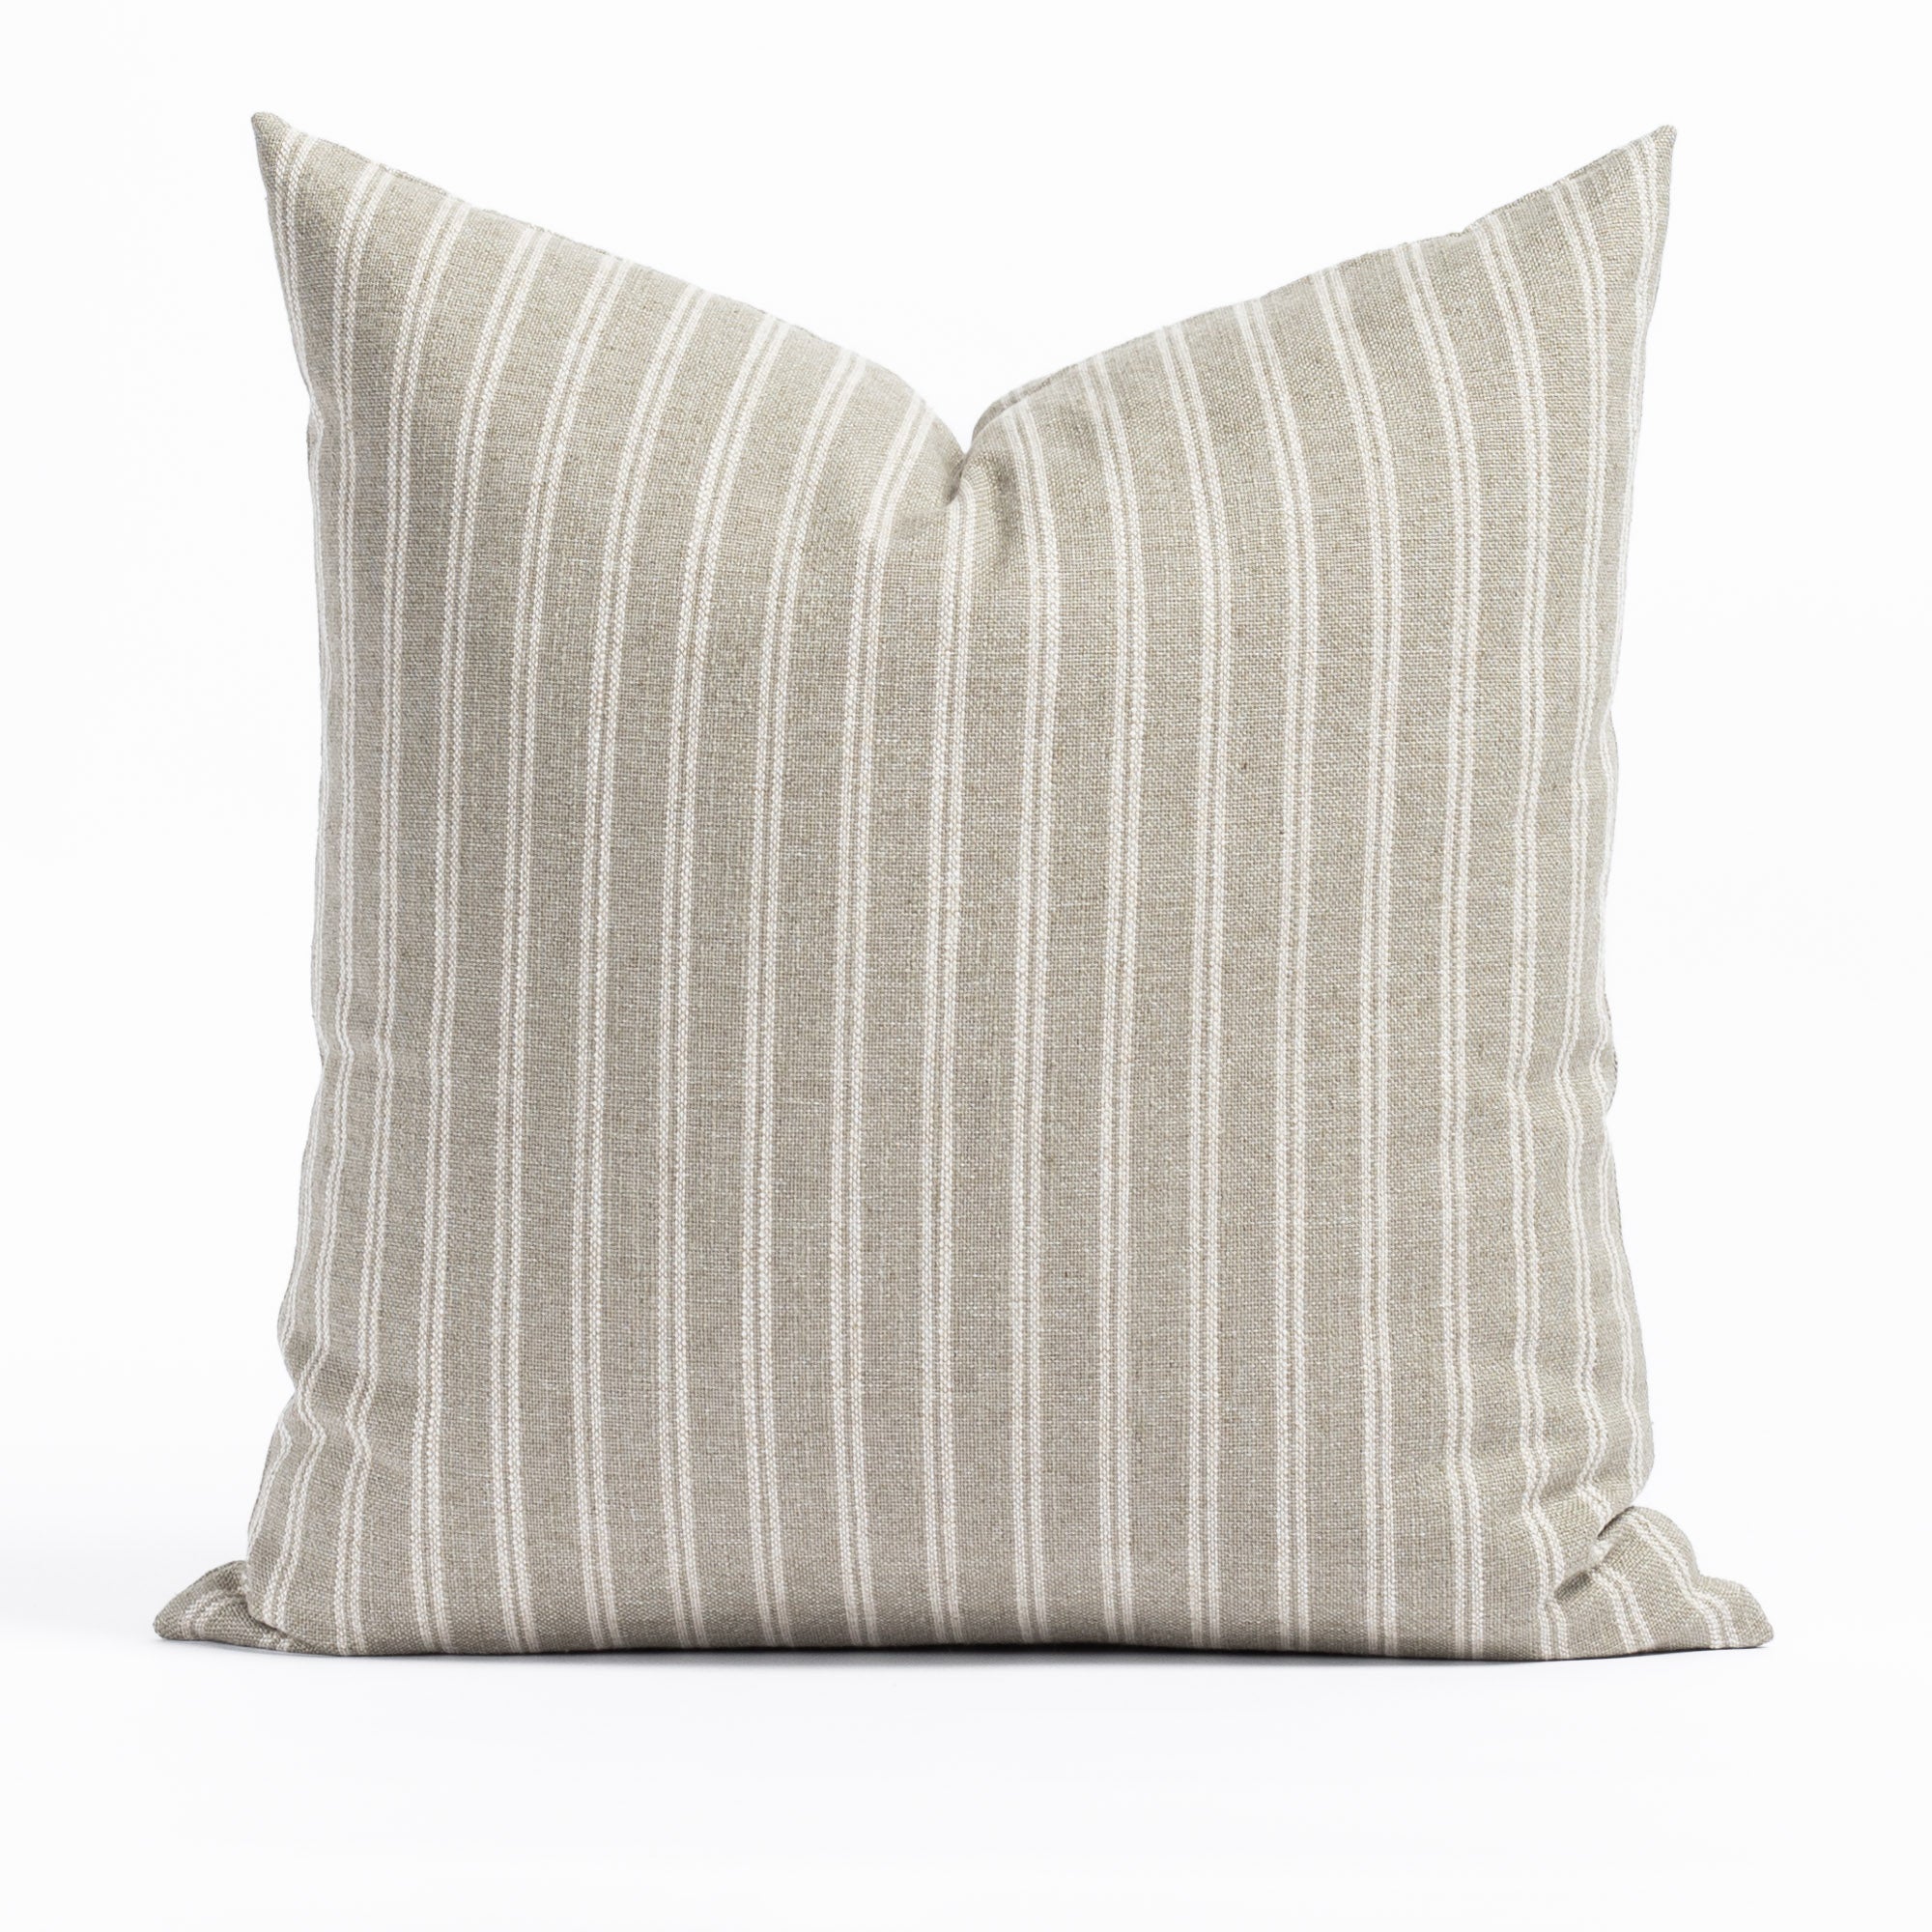 Conway 20x20 Pillow Sage, a dusty sage green and oatmeal beige vertical stripe Belgian farmhouse throw pillow from Tonic Living